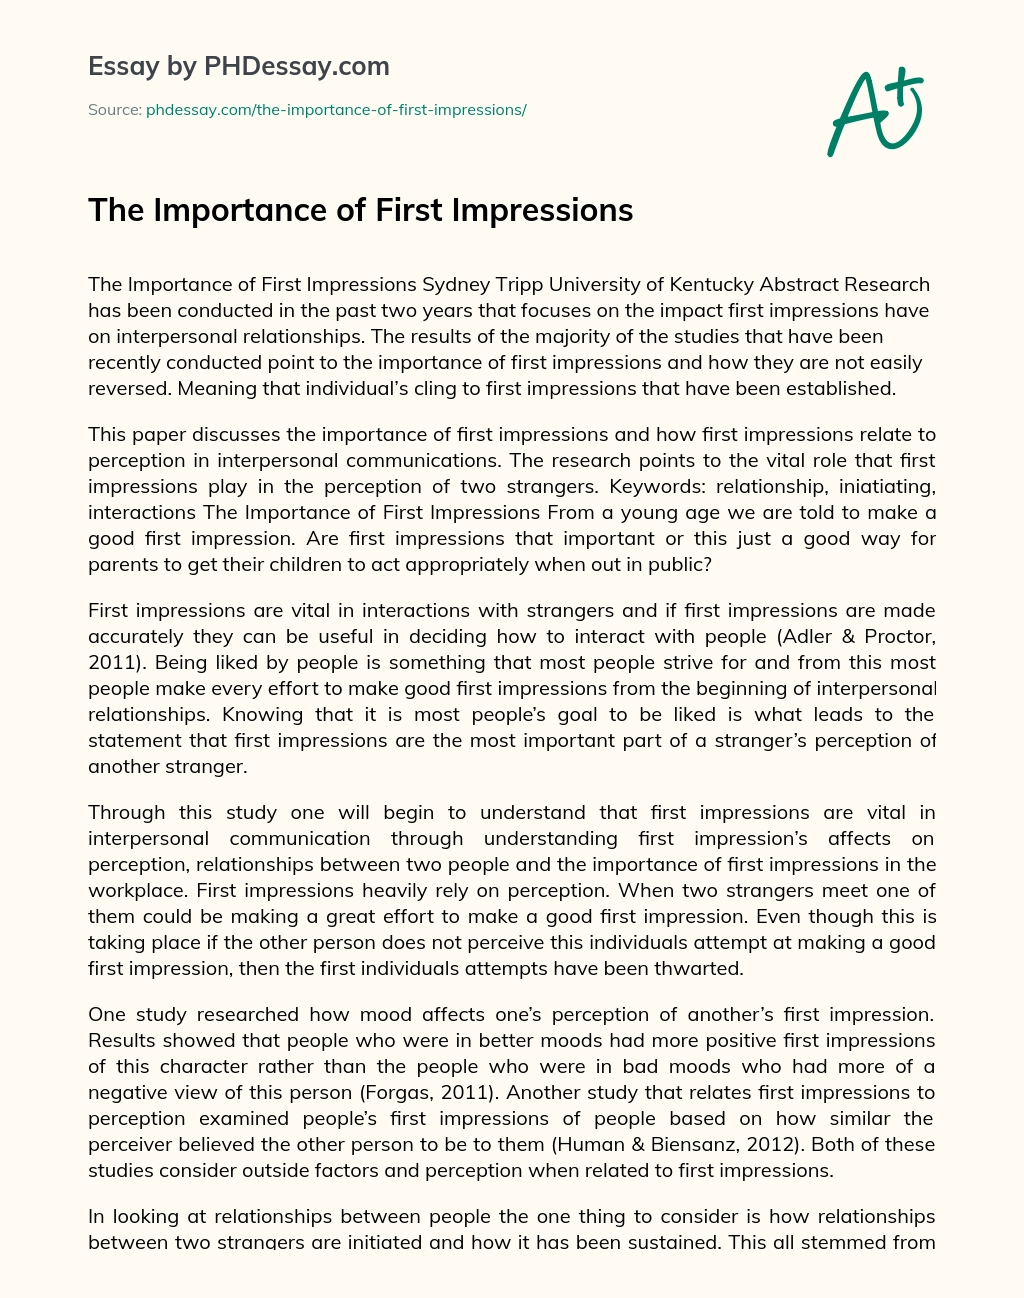 The Importance of First Impressions essay